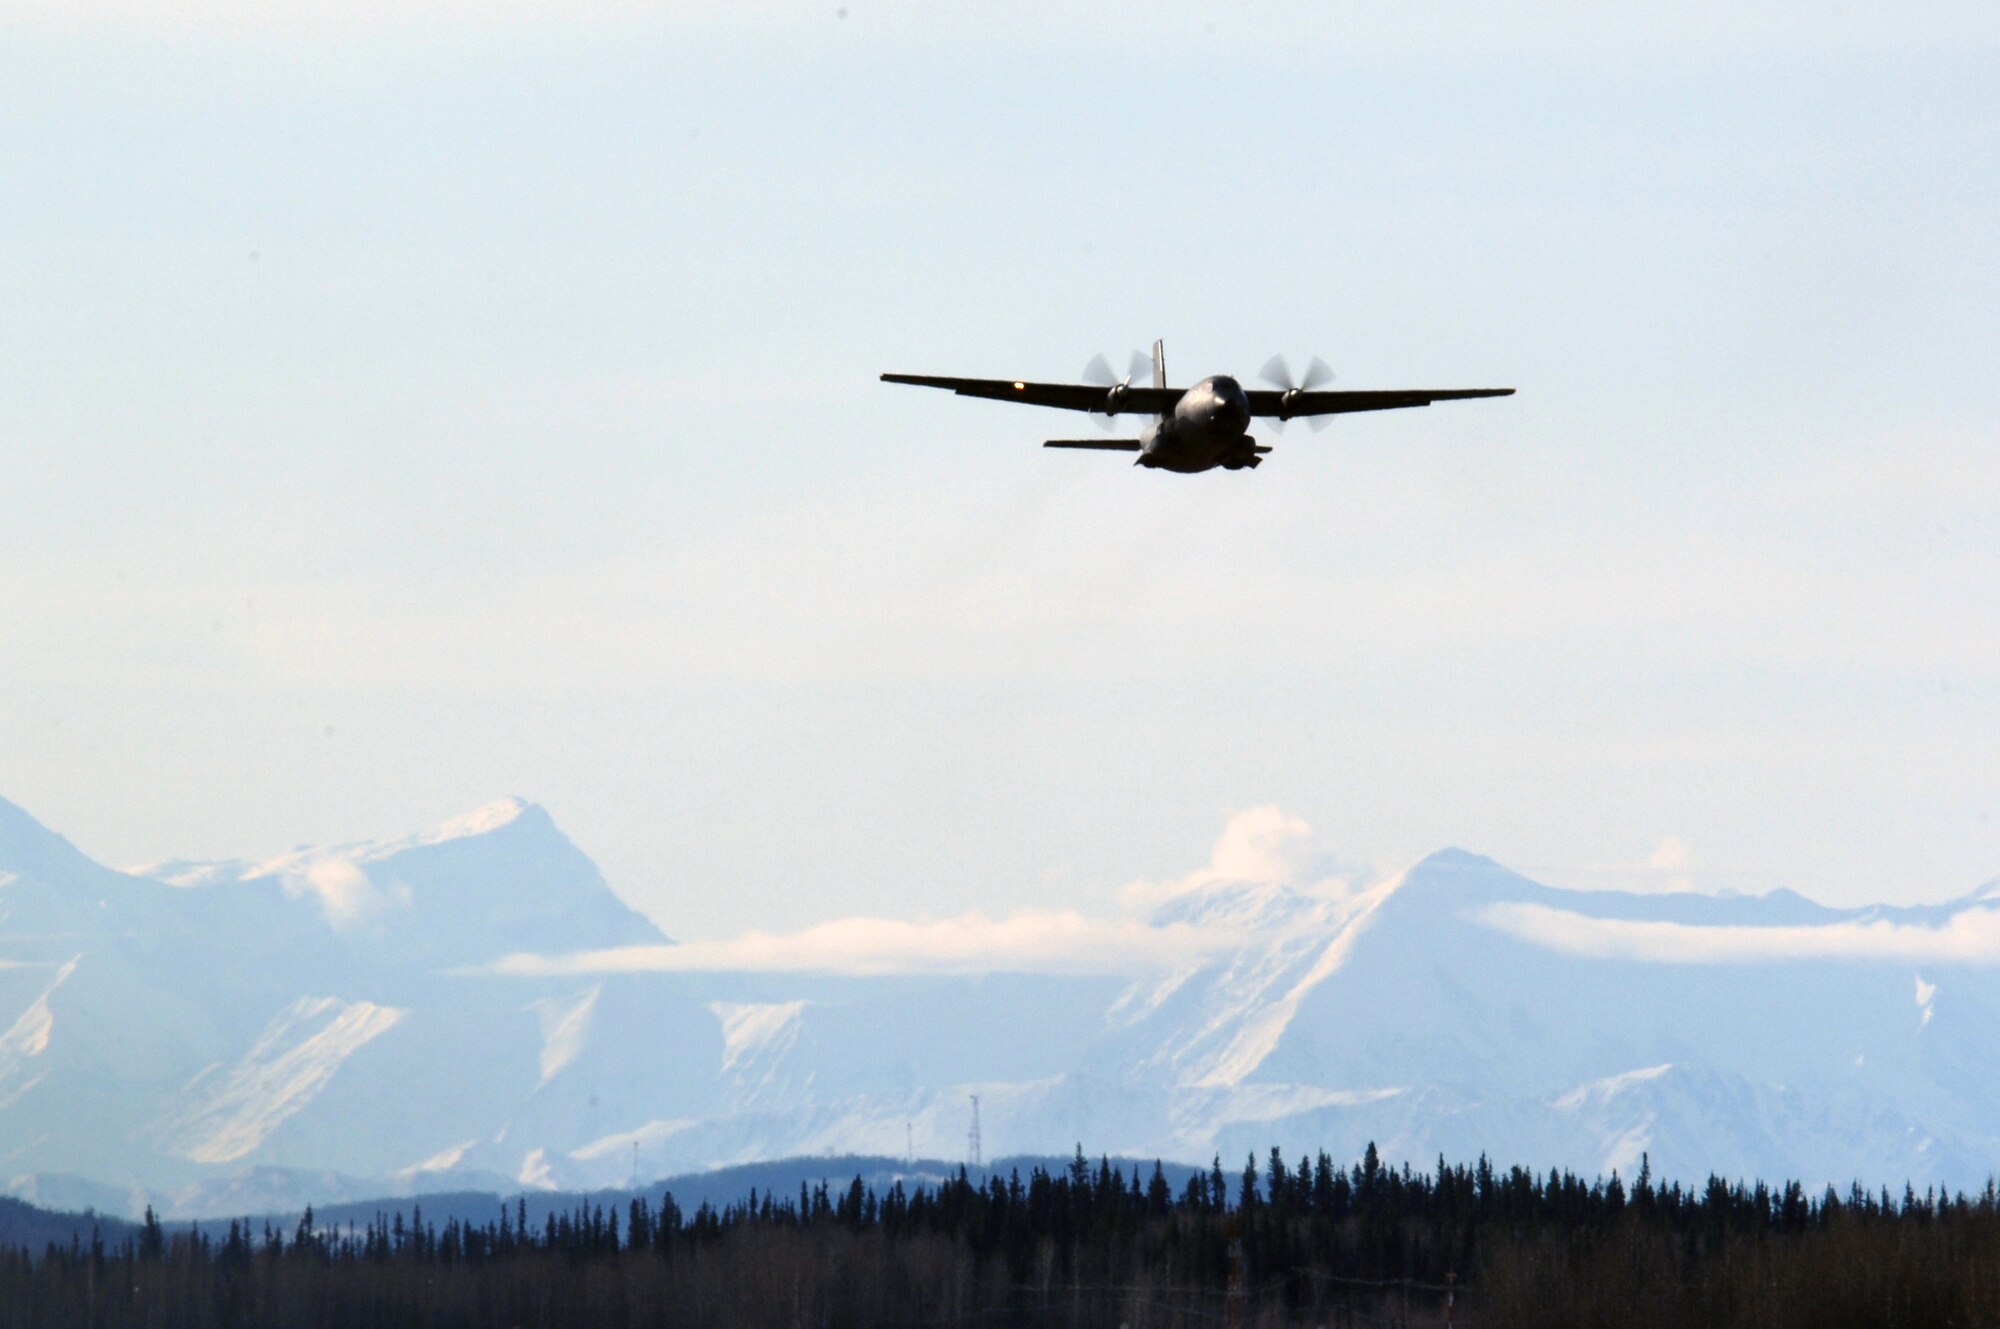 EIELSON AIR FORCE BASE, Alaska -- A French C-160 aircraft from the Armee de l'Air (French Air Force), takes off for a mission during Red Flag-Alaska 07-1 here on April 10. Red Flag-Alaska is a Pacific Air Forces-directed field training exercise for U.S. forces flown under simulated air combat conditions. It is conducted on the Pacific Alaskan Range Complex with air operations flown out of Eielson and Elmendorf Air Force Bases.
(U.S. Air Force Photo by Staff Sgt Joshua Strang)